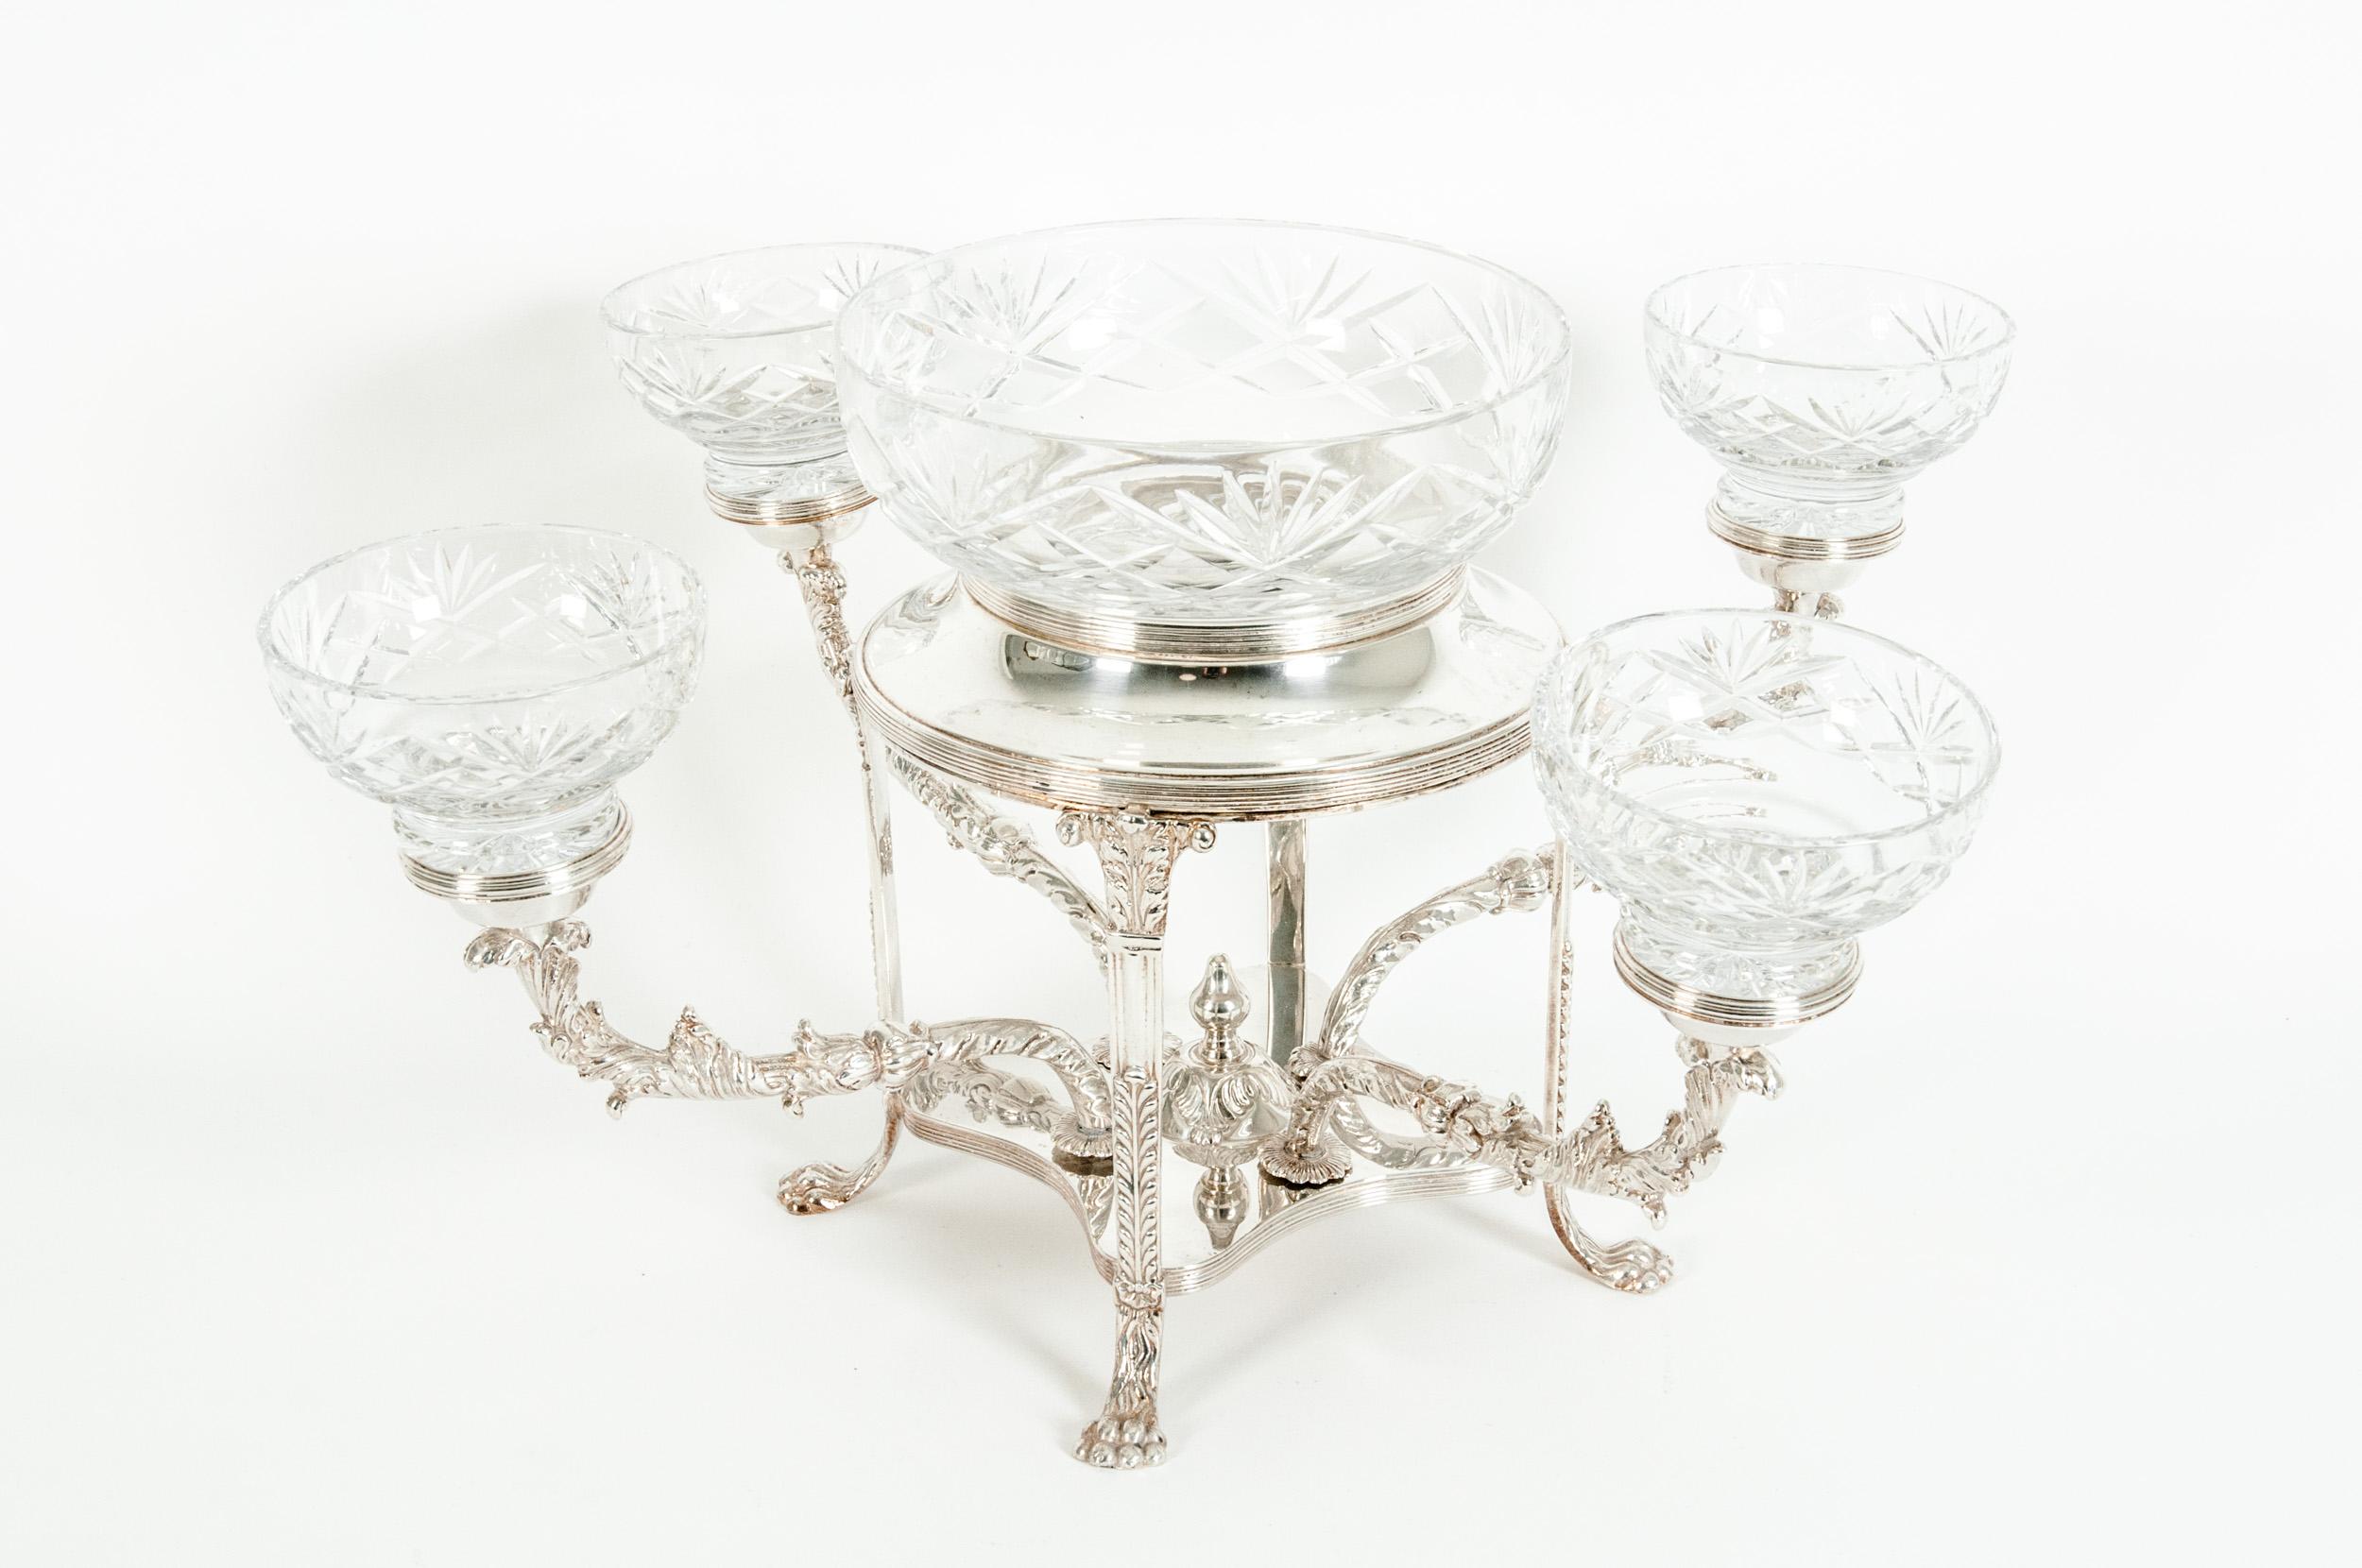 English Plated / Cut Crystal Centerpiece / Epergne 2